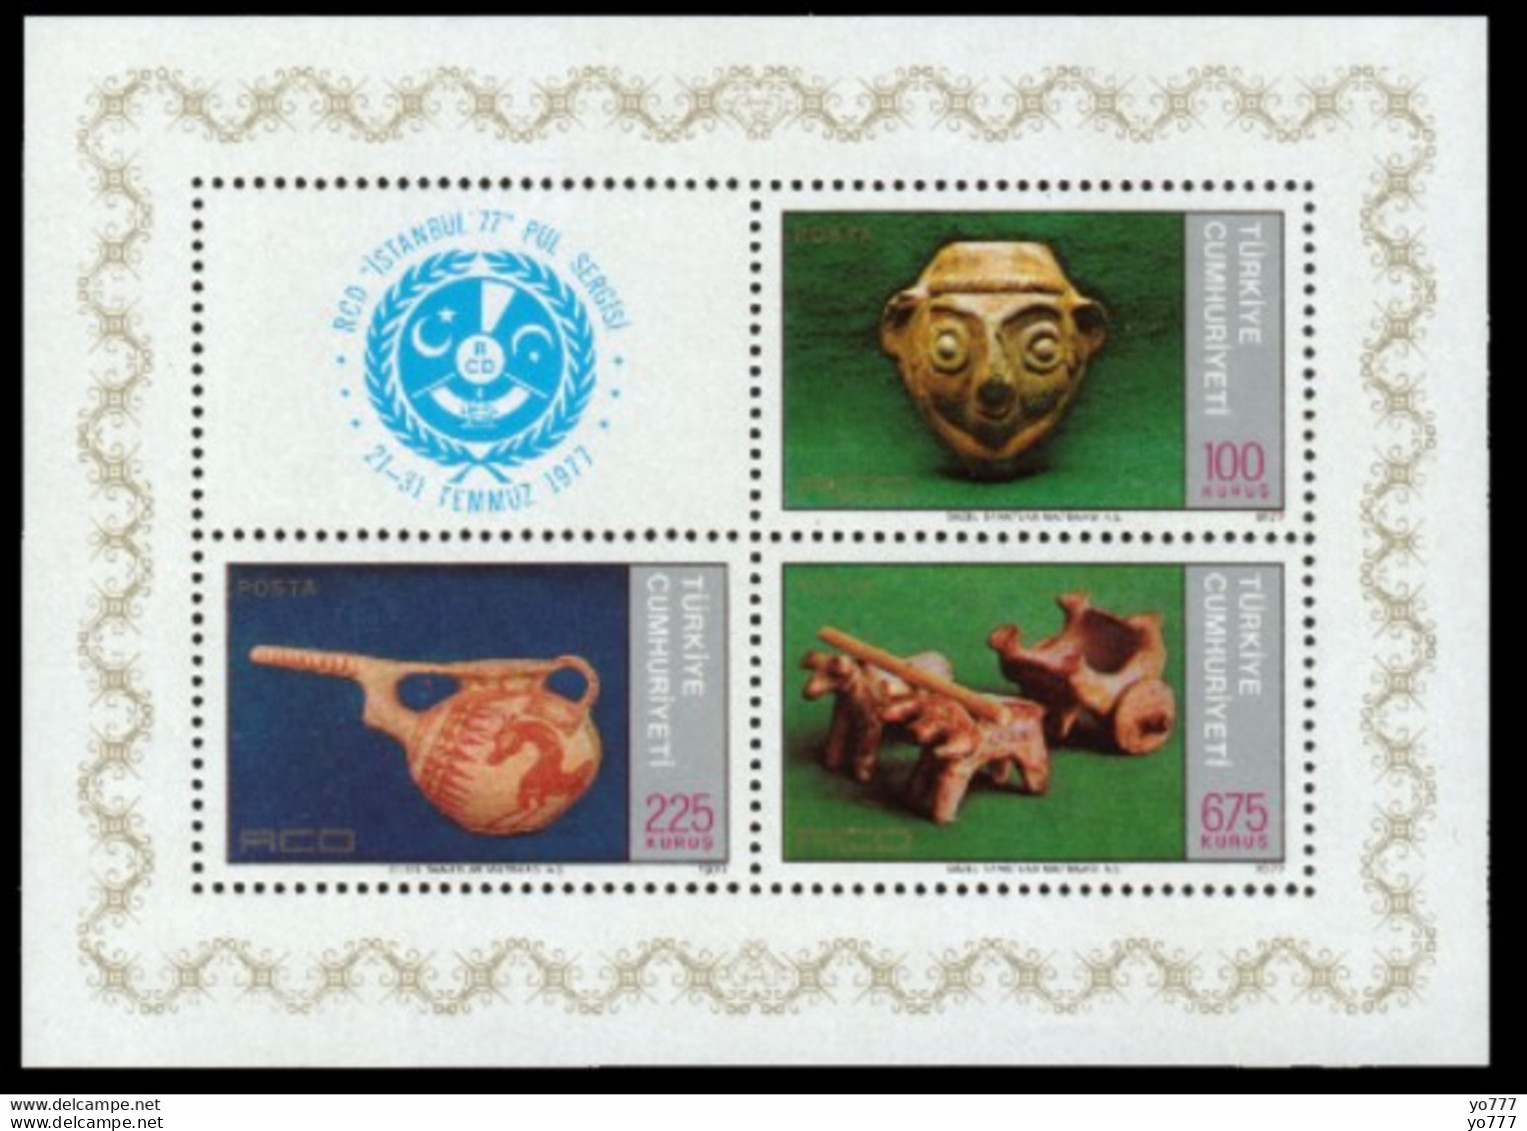 (2420 BL17)  TURKEY ISTANBUL 77 (RCD) STAMP EXHIBITION SOUVENIR SHEET MNH** - Unused Stamps